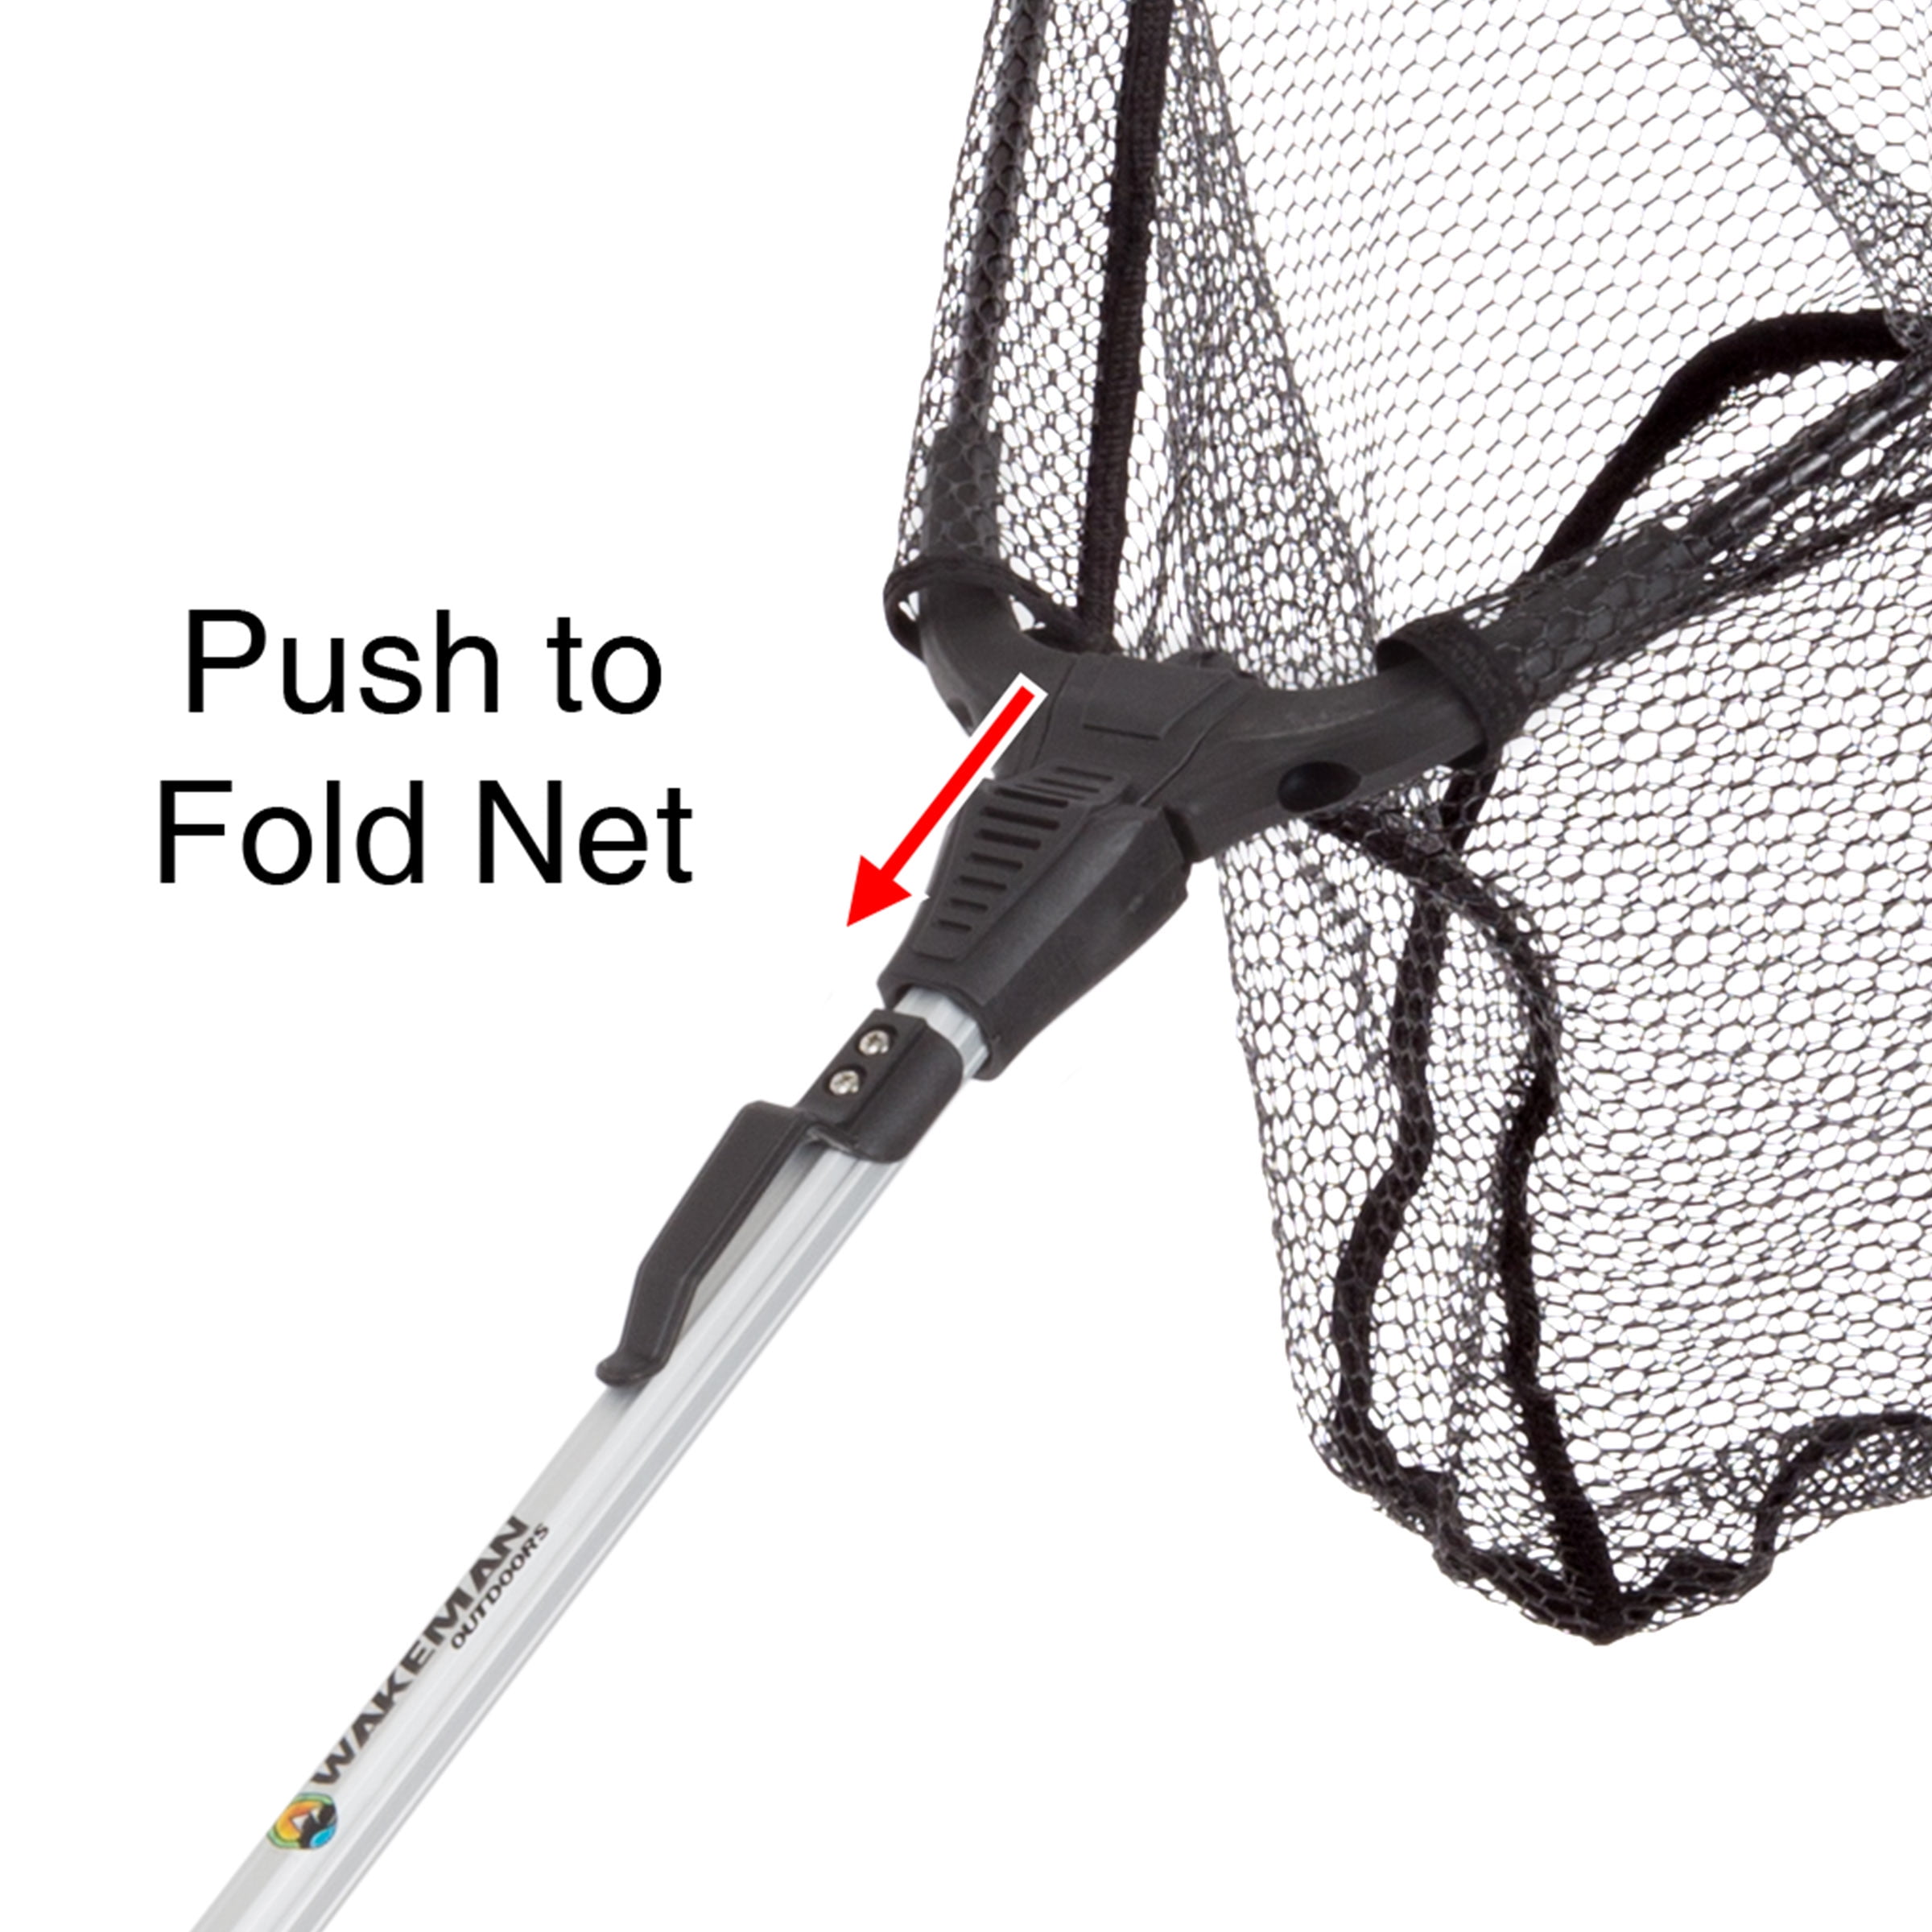 Fishing Net with Telescoping Handle- Collapsible and Adjustable Landing Net  with Corrosion Resistant Handle and Carry Bag By Wakeman Outdoors (80”) 